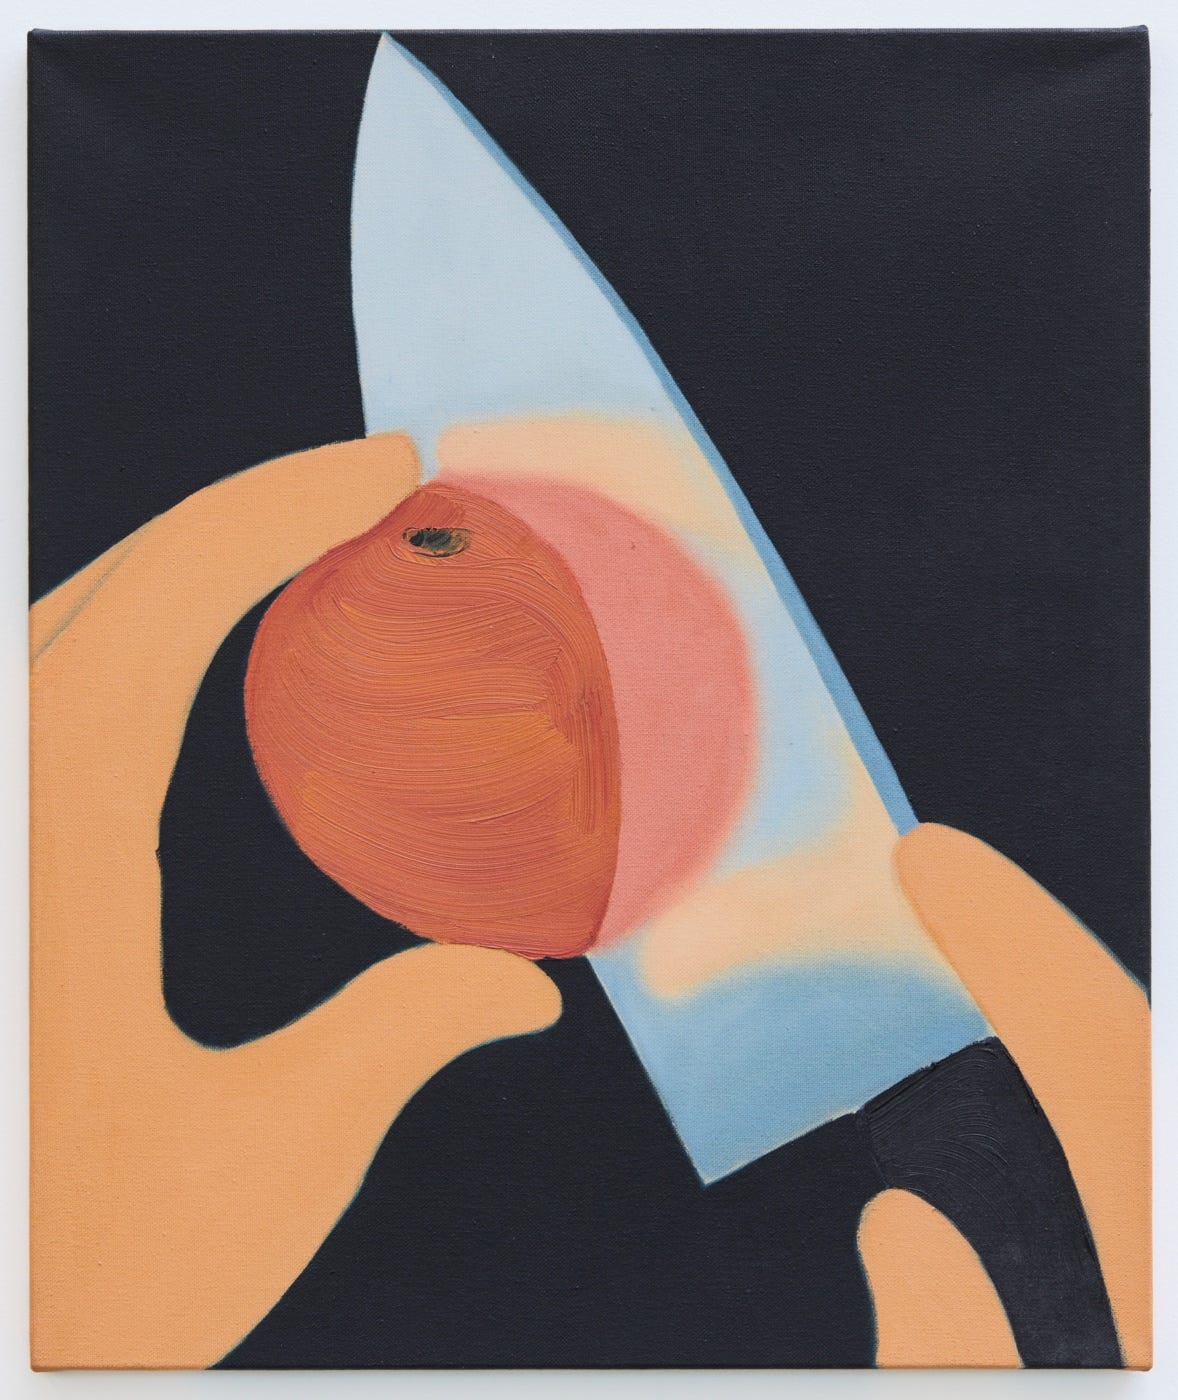 Sharp, 2016, oil on canvas, 21 3/4 × 18 inches